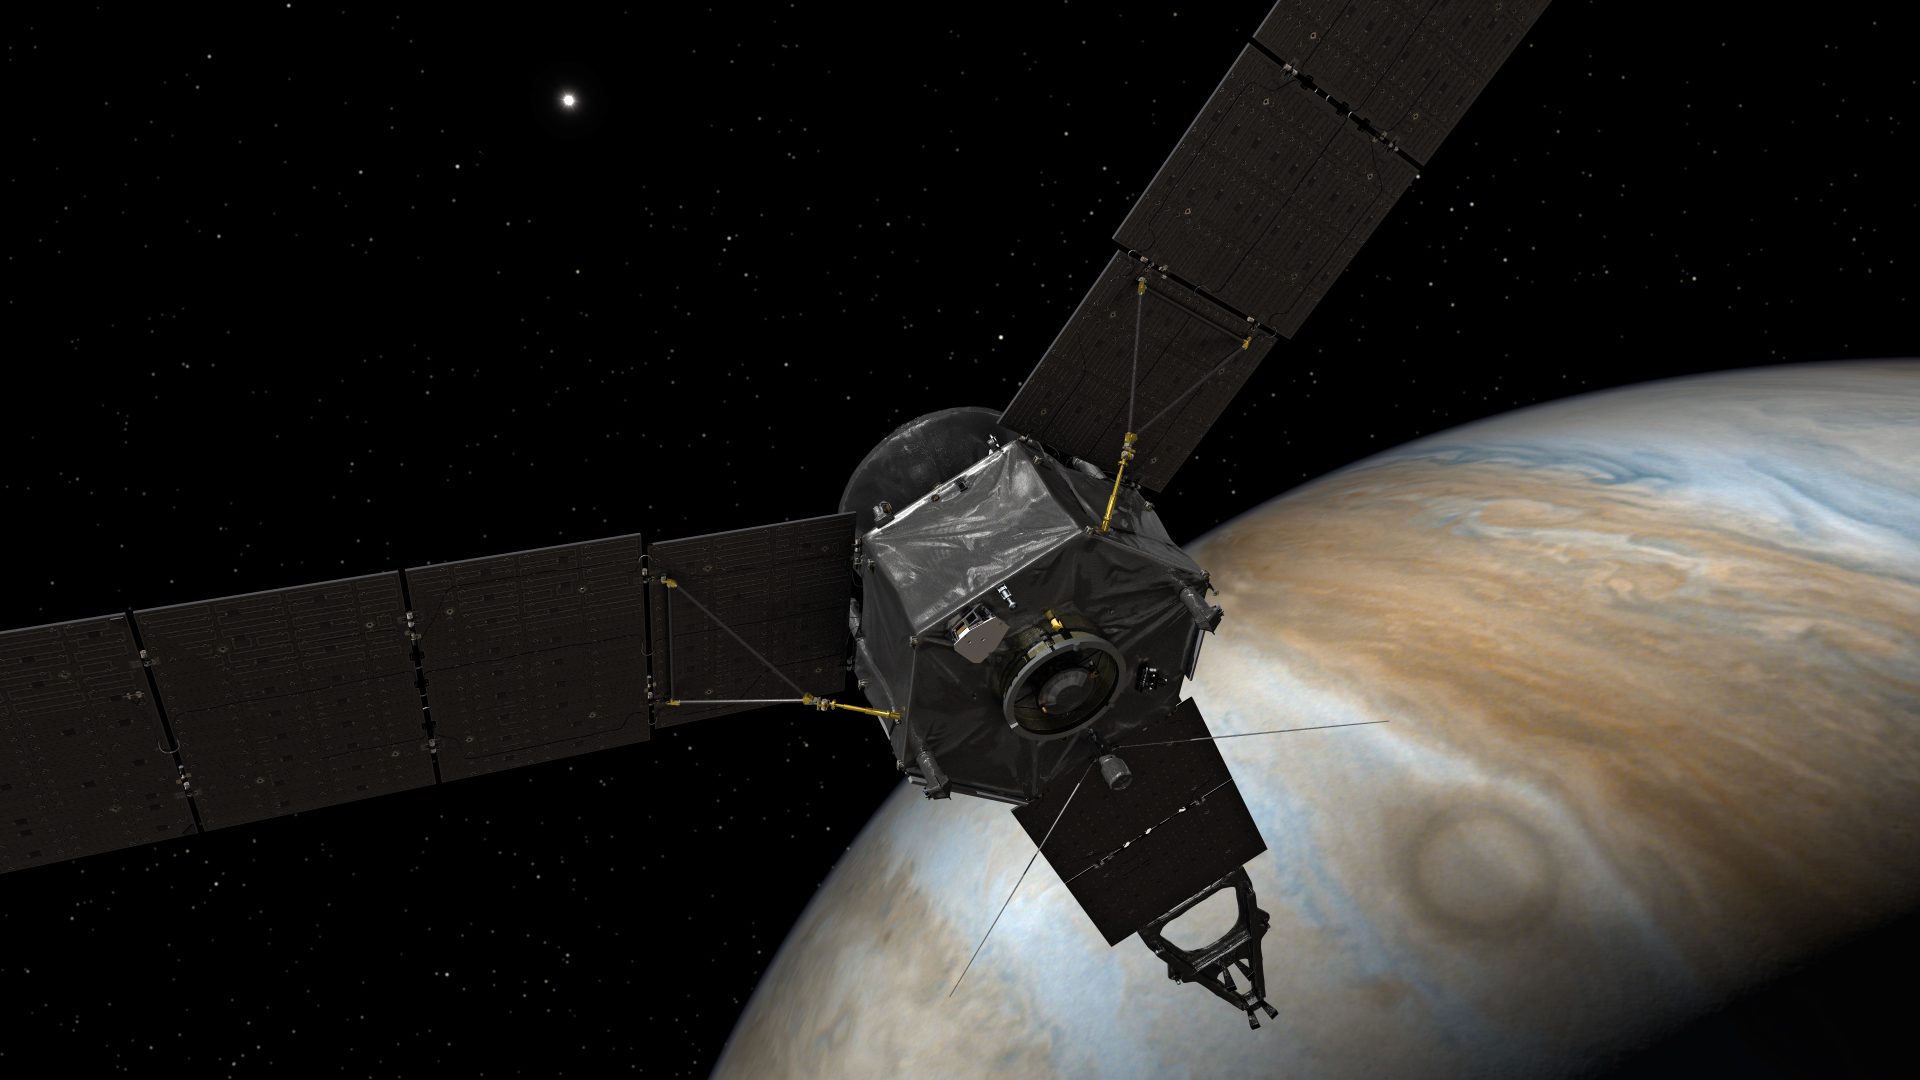 This illustration depicts NASA's Juno spacecraft at Jupiter, with its solar arrays and main antenna pointed toward the distant sun and Earth. Credits: NASA/JPL-Caltech  